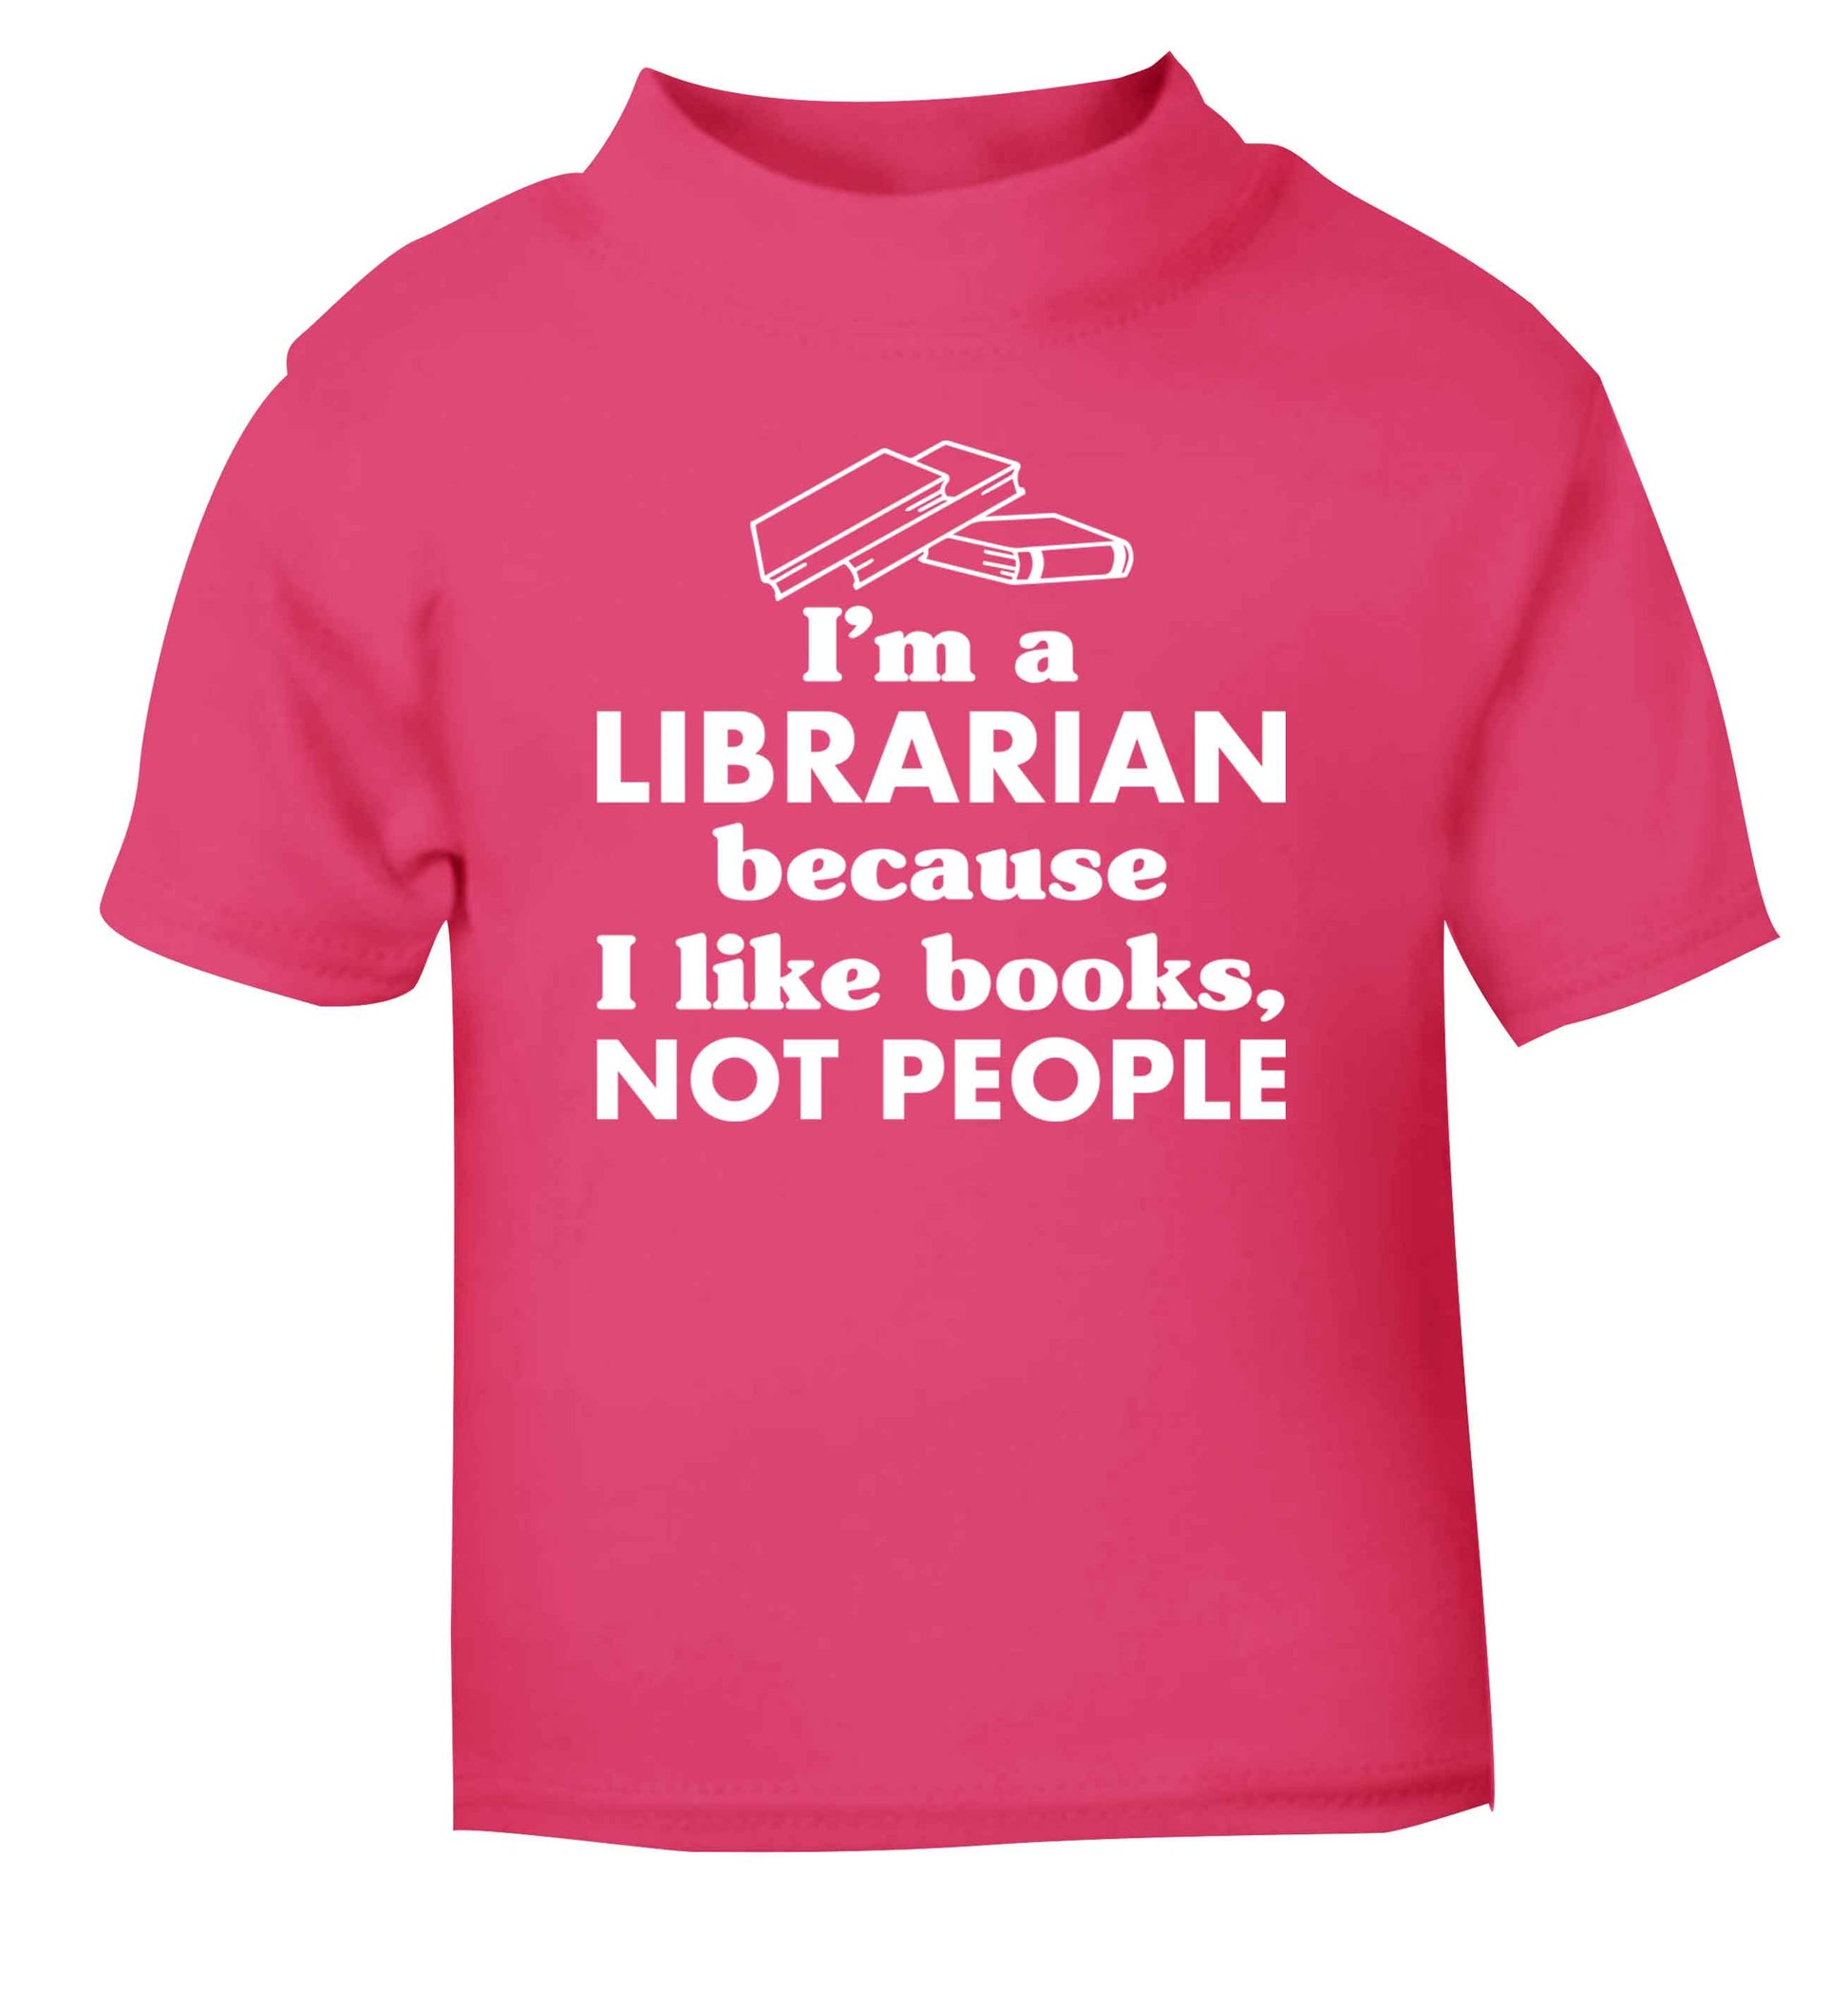 I'm a librarian because I like books not people pink Baby Toddler Tshirt 2 Years